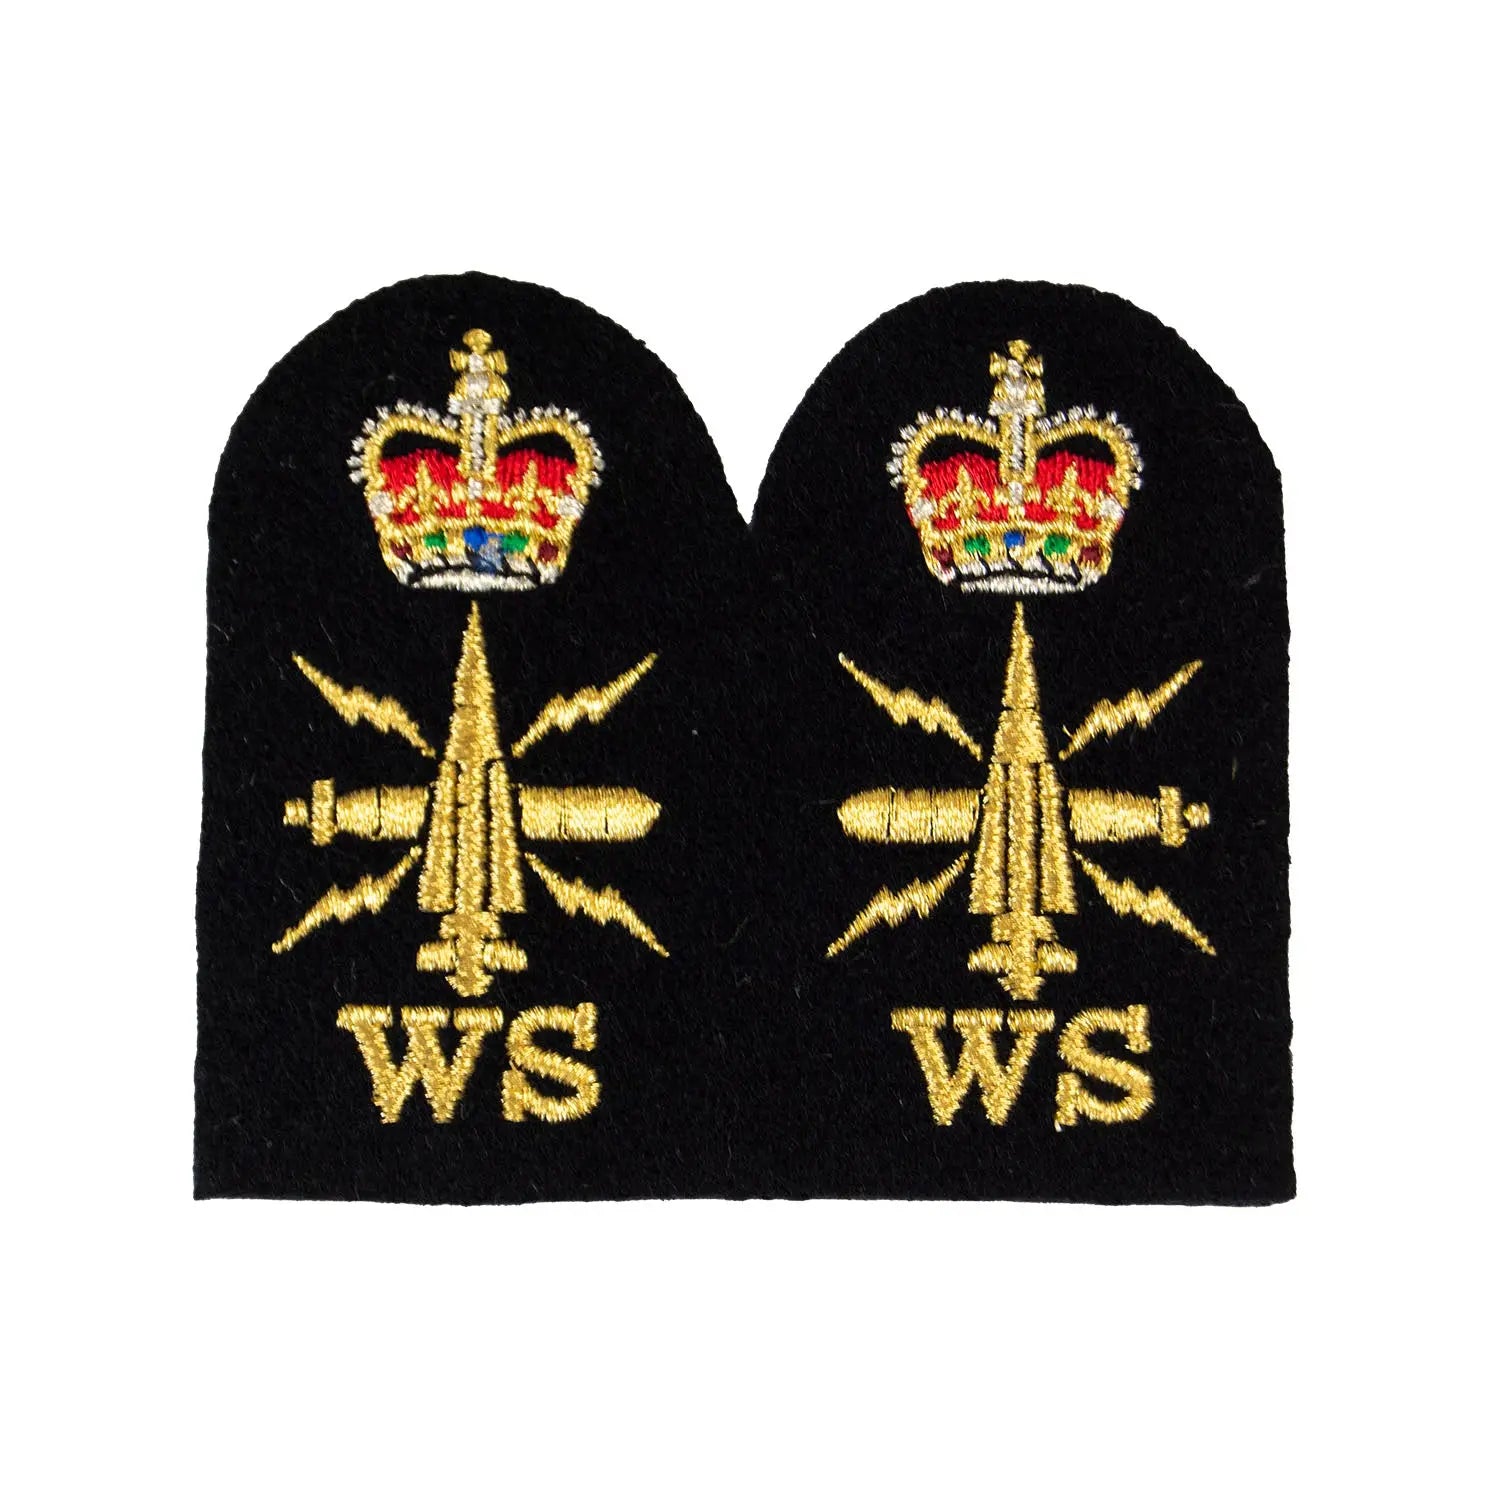 Warfare WS Chief Petty Officer Royal Navy Badges wyedean